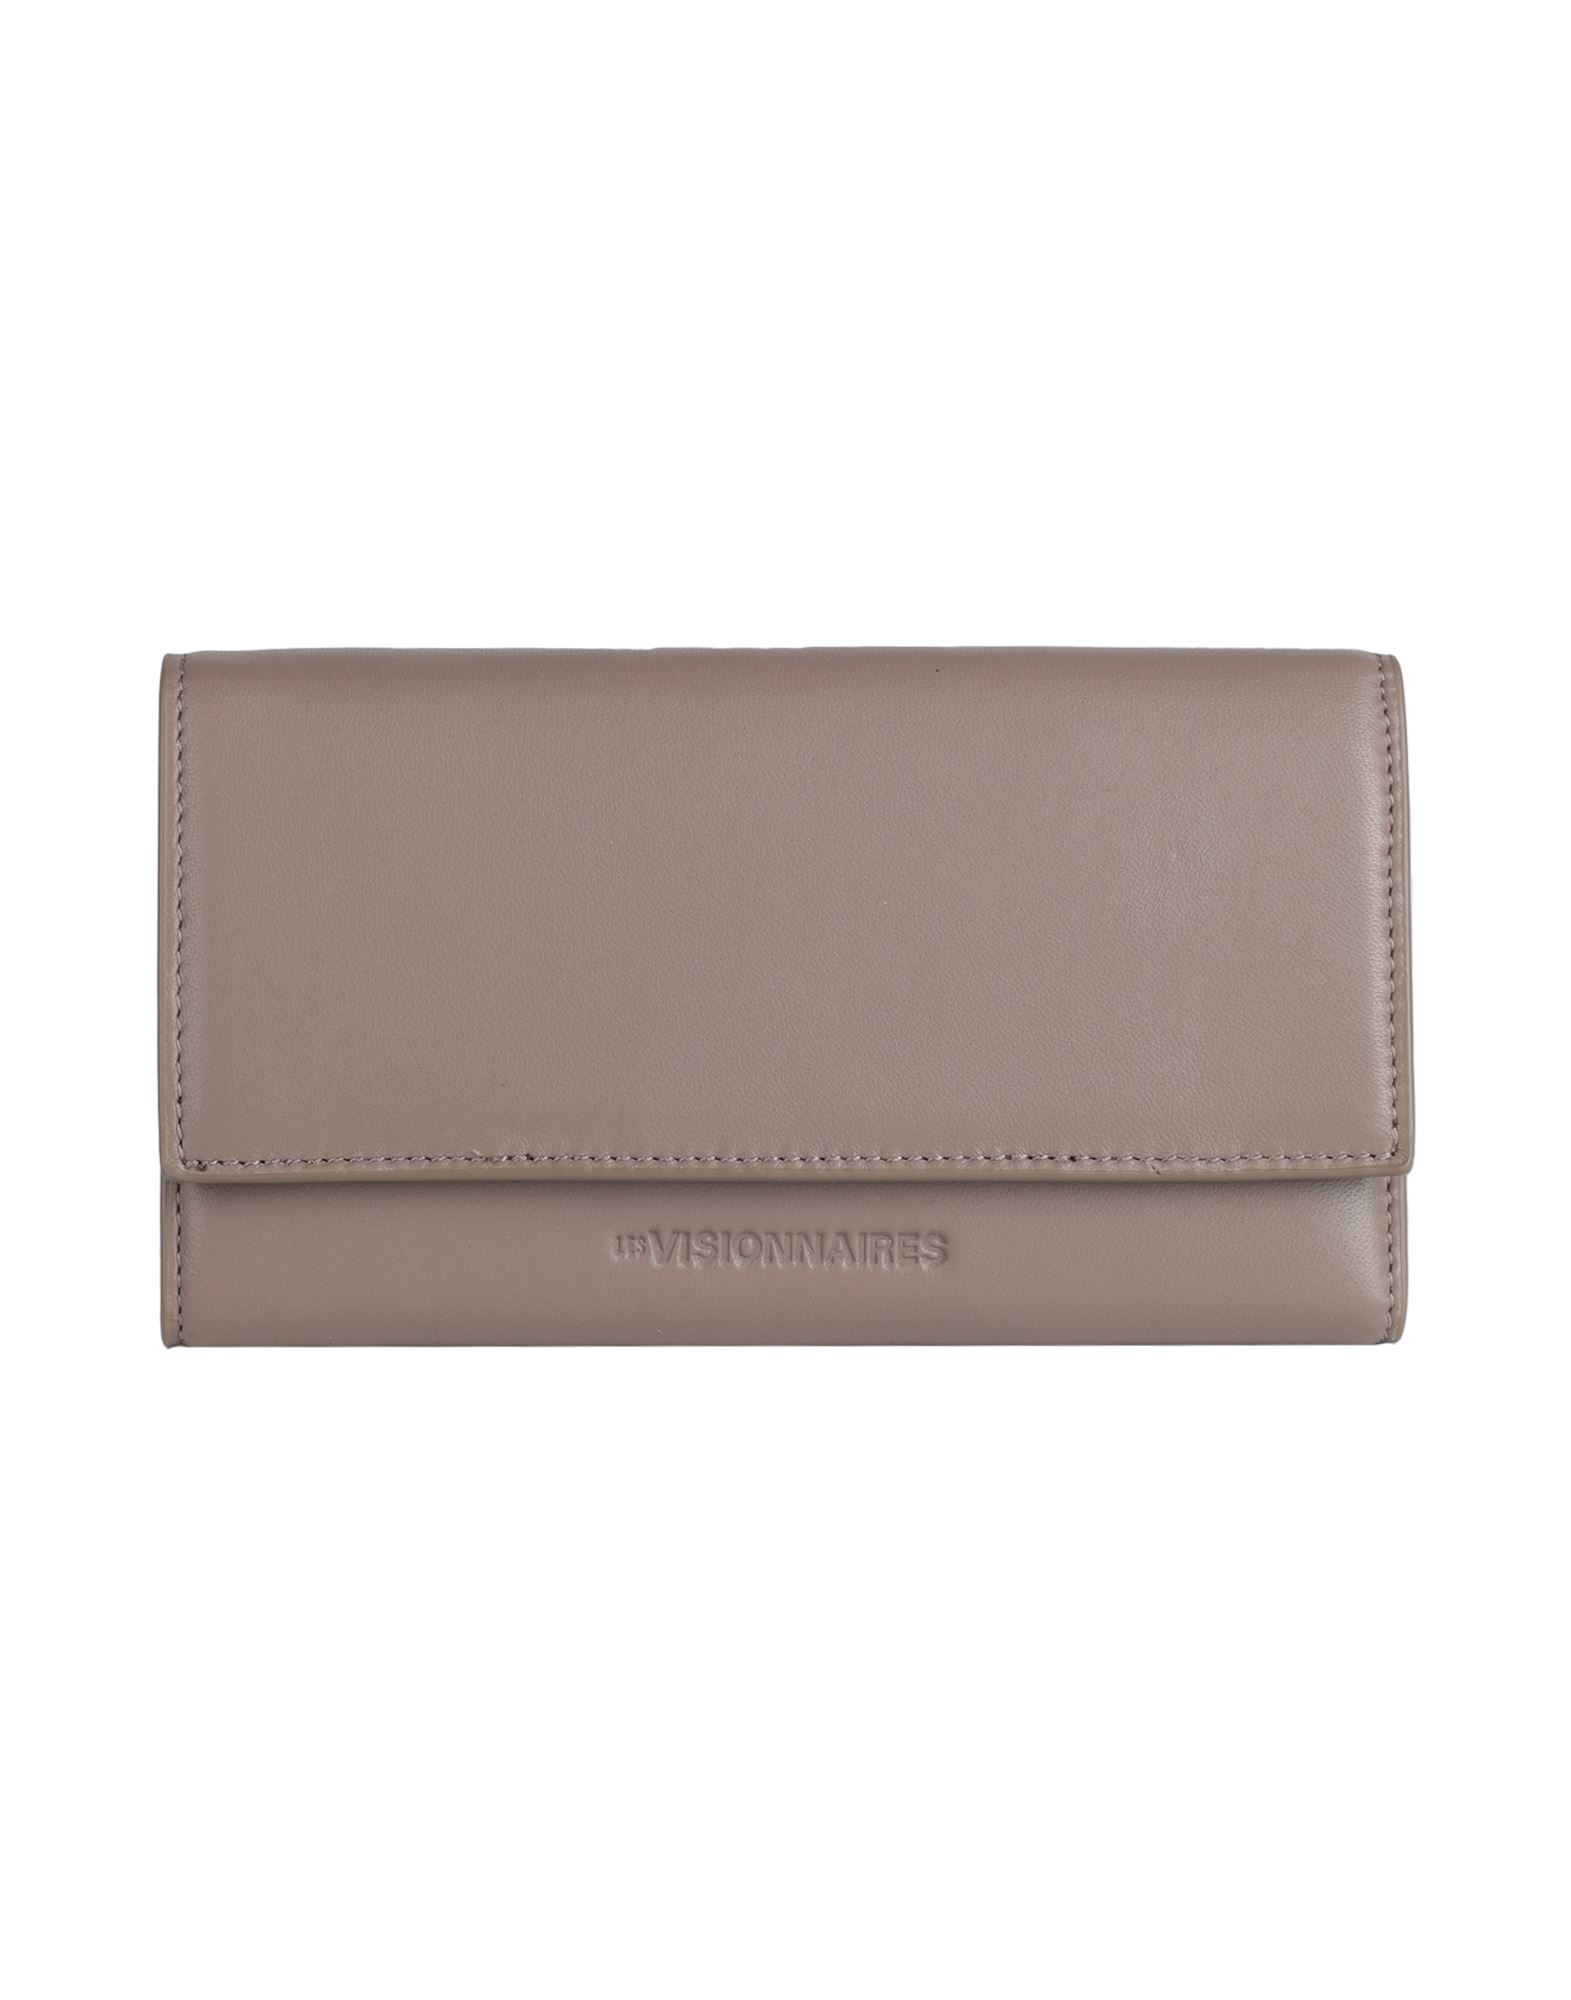 Les Visionnaires Wallets In Grey